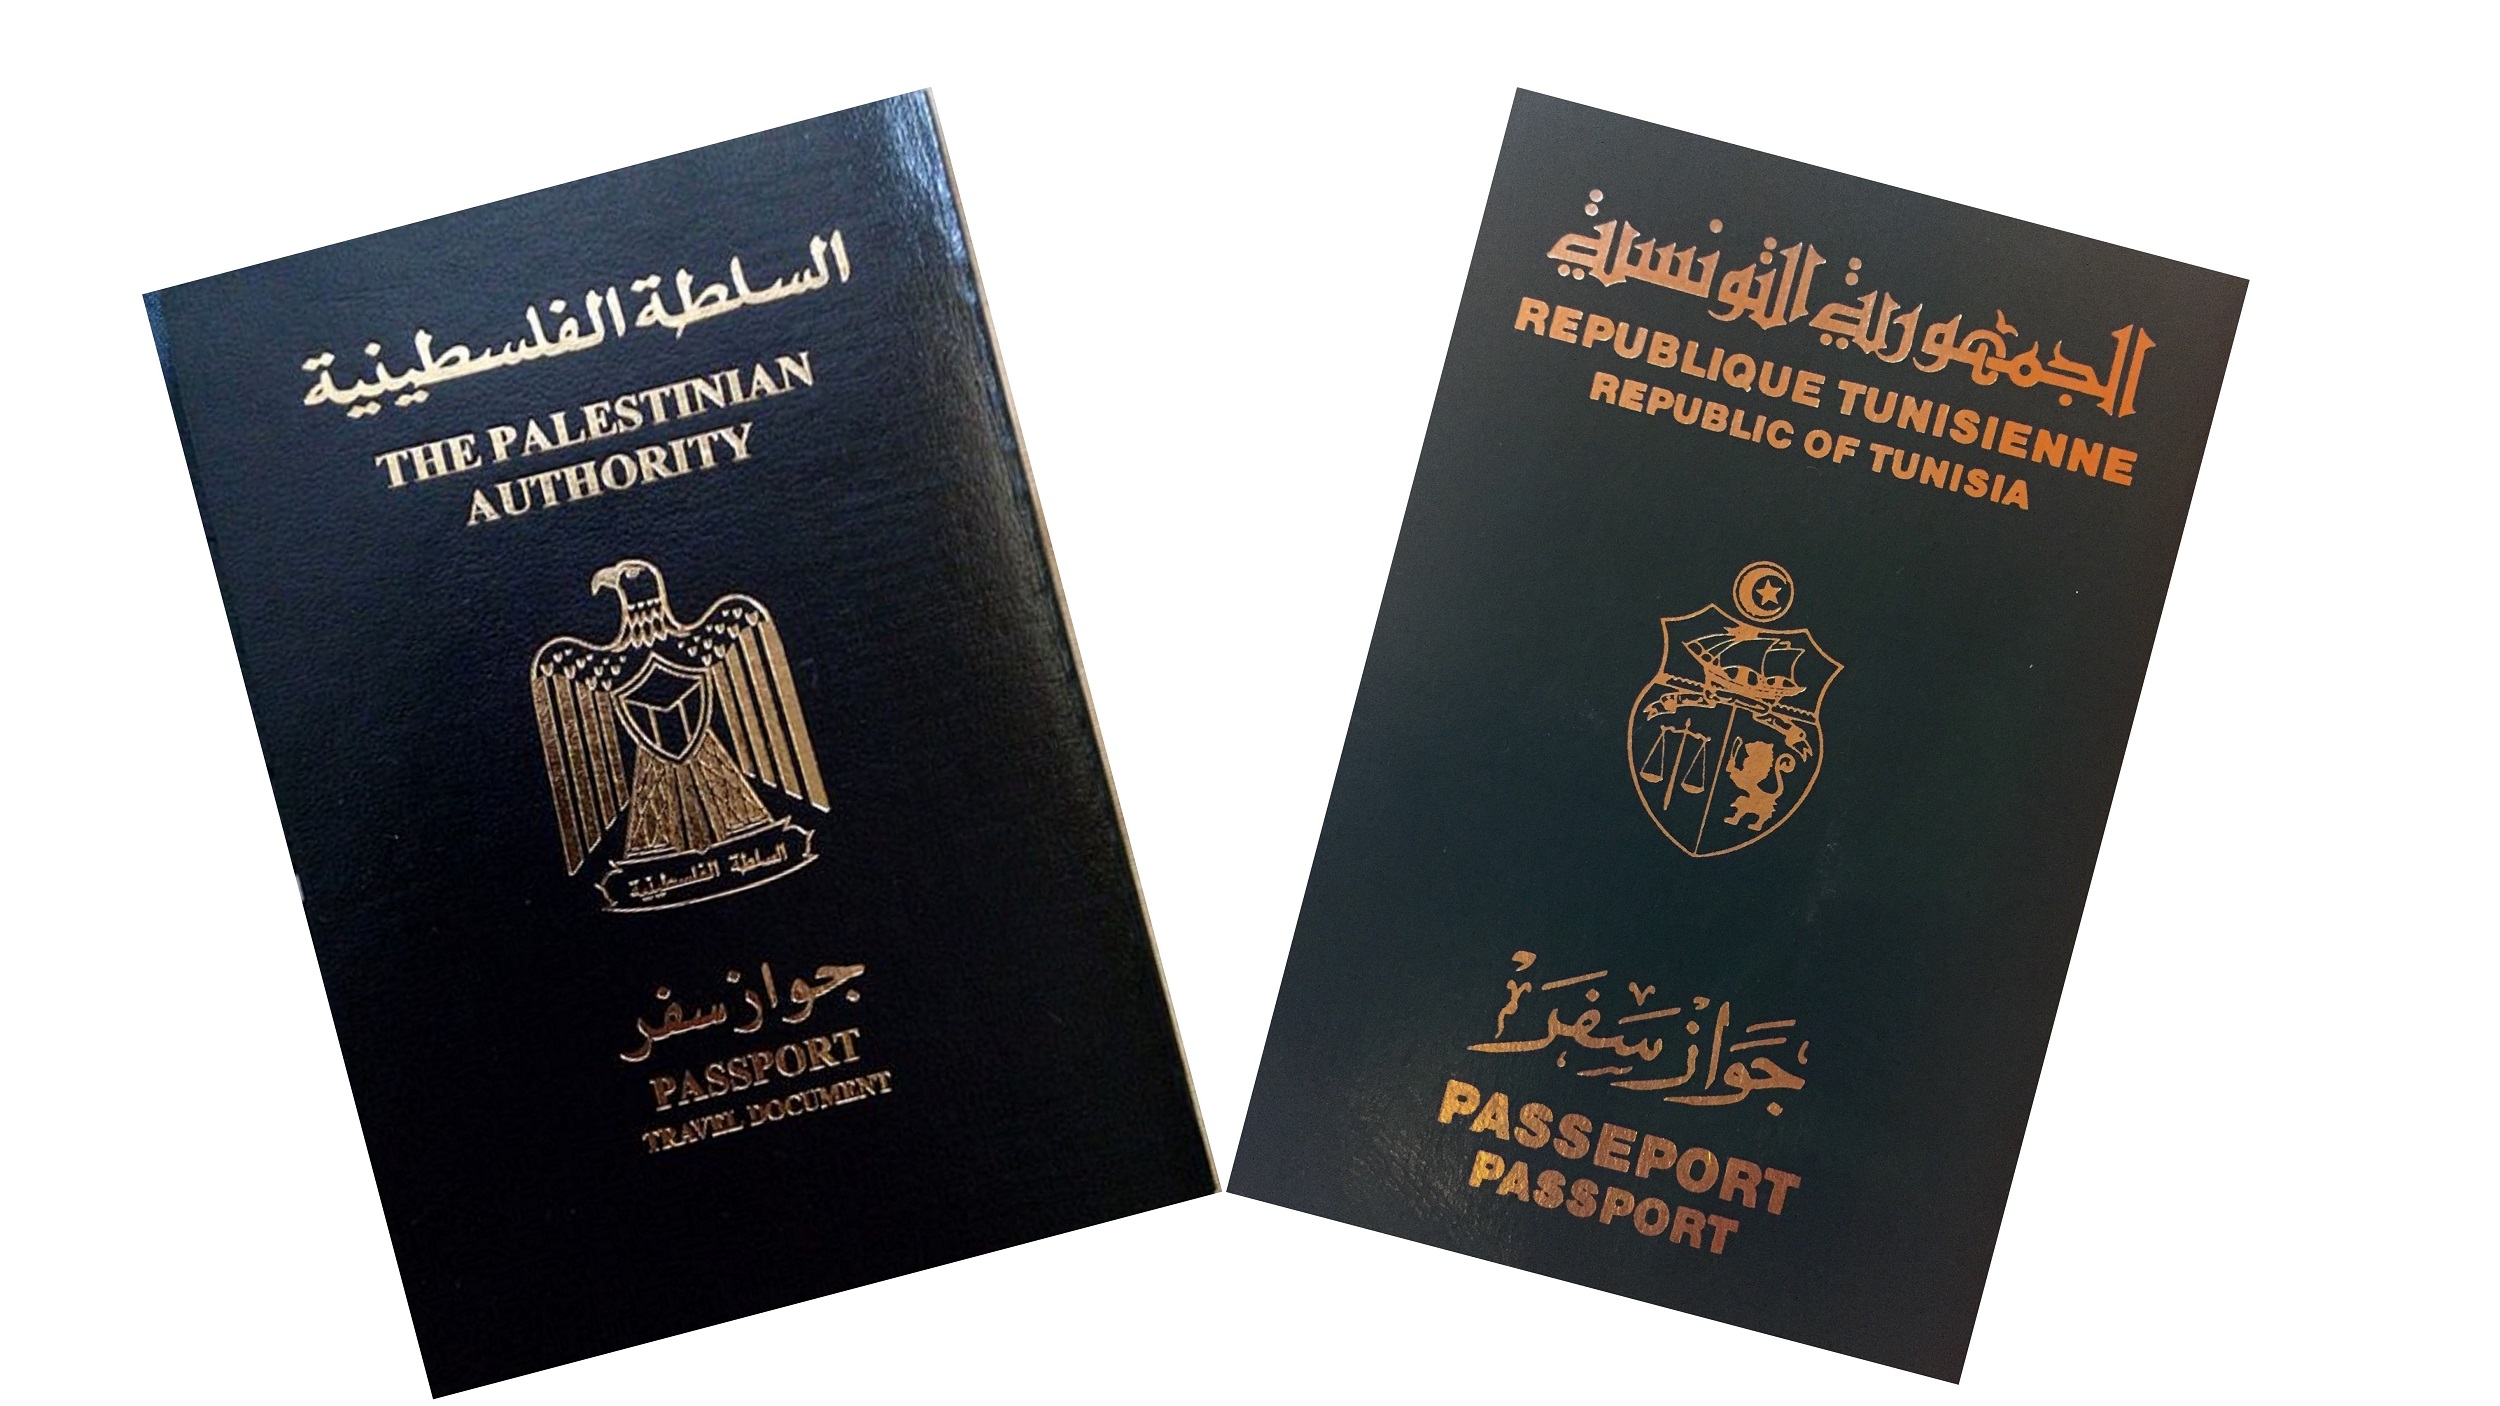 Host Countries Granting Citizenship to Palestinians Empowers Them, Analysts Say